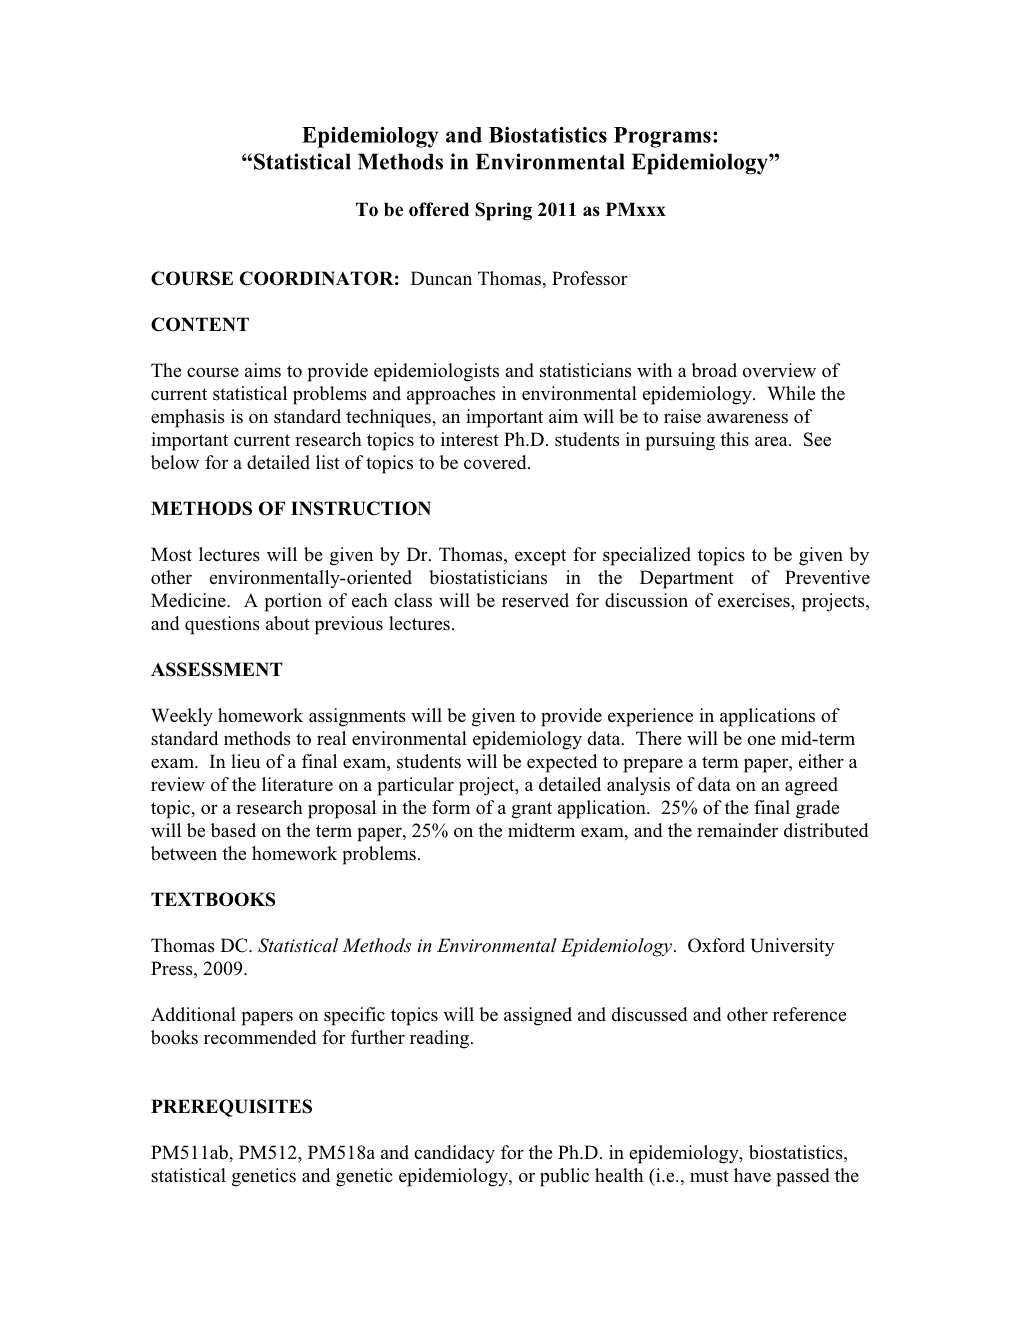 Proposal for a New Course in Epidemiology and Biostatistics